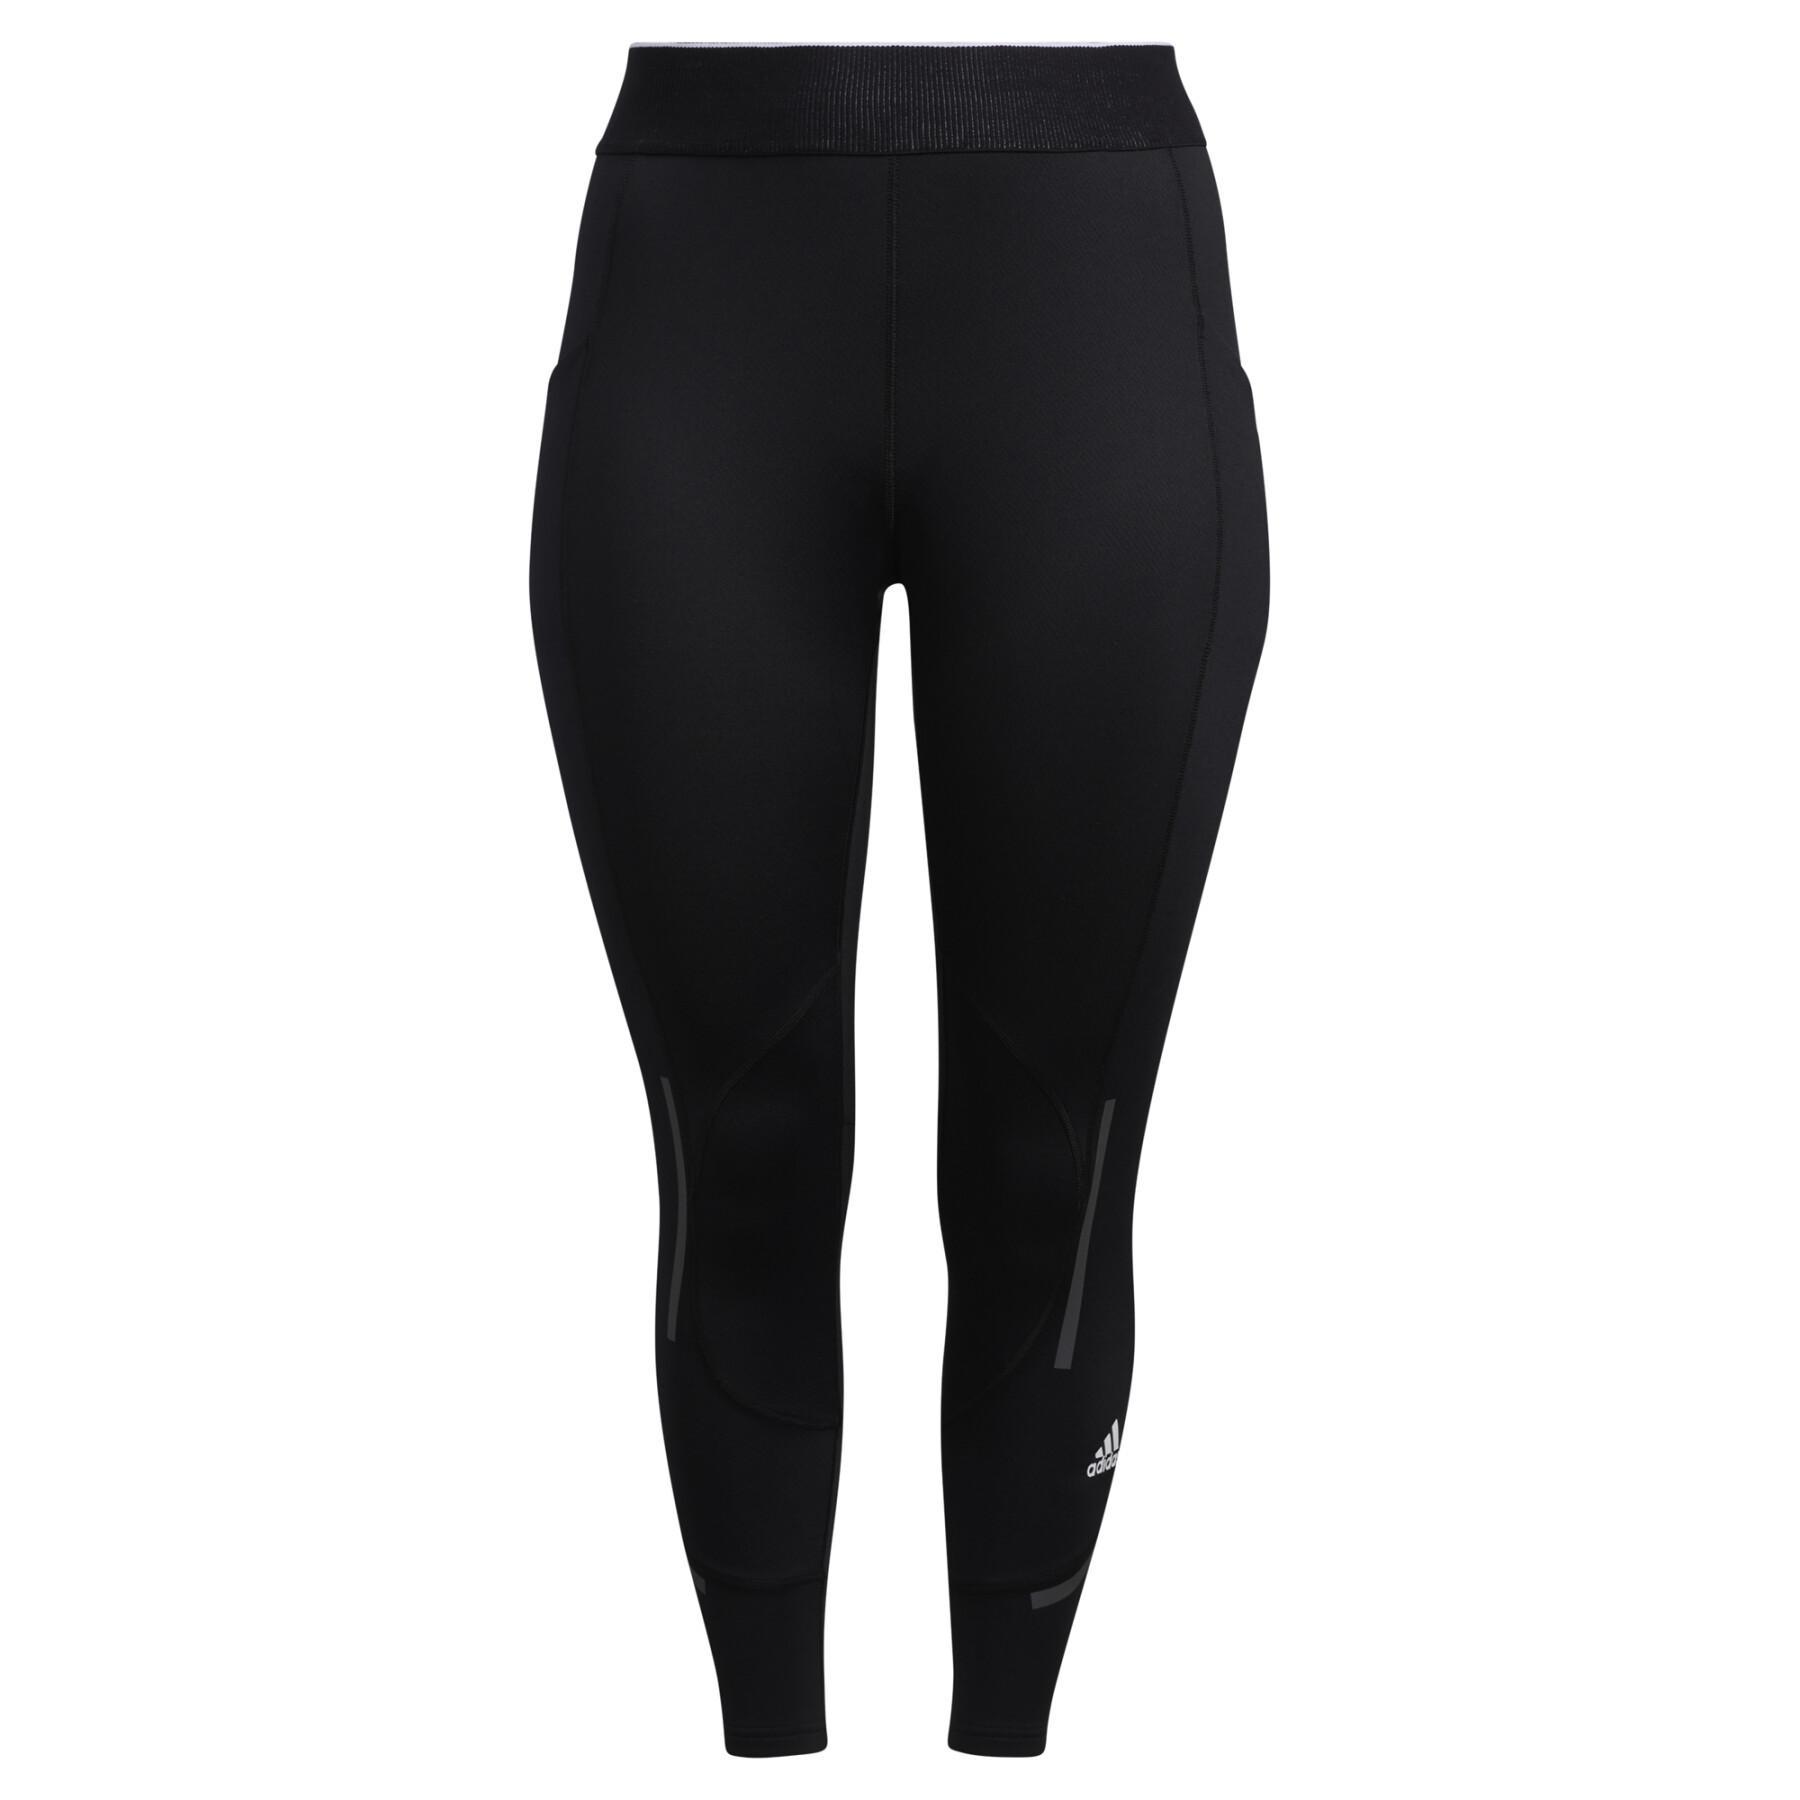 Women's tights adidas Techfit COLD.RDY Long (Plus Size)